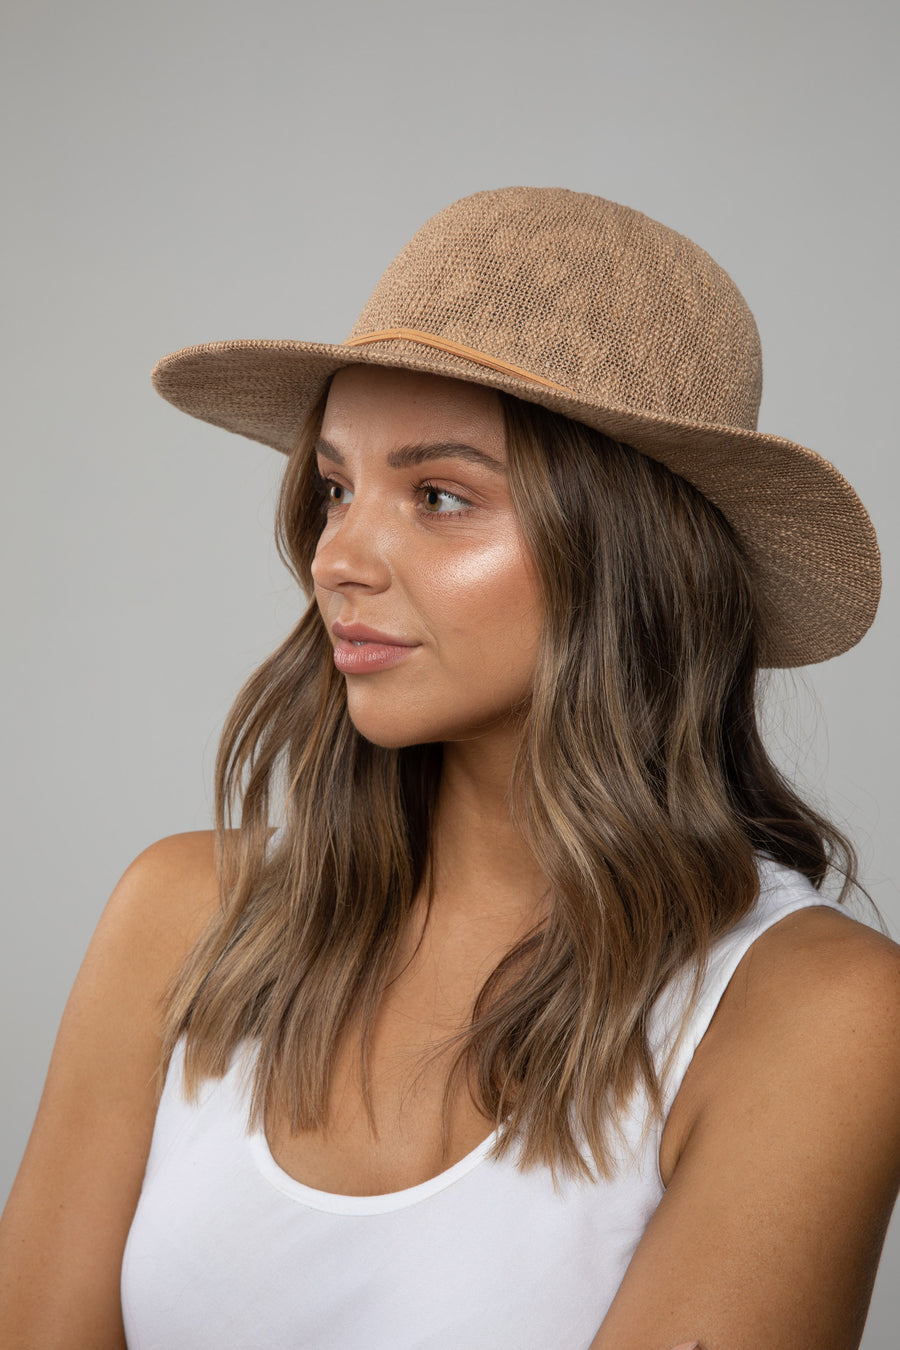 Polo Classic Hat - Camel